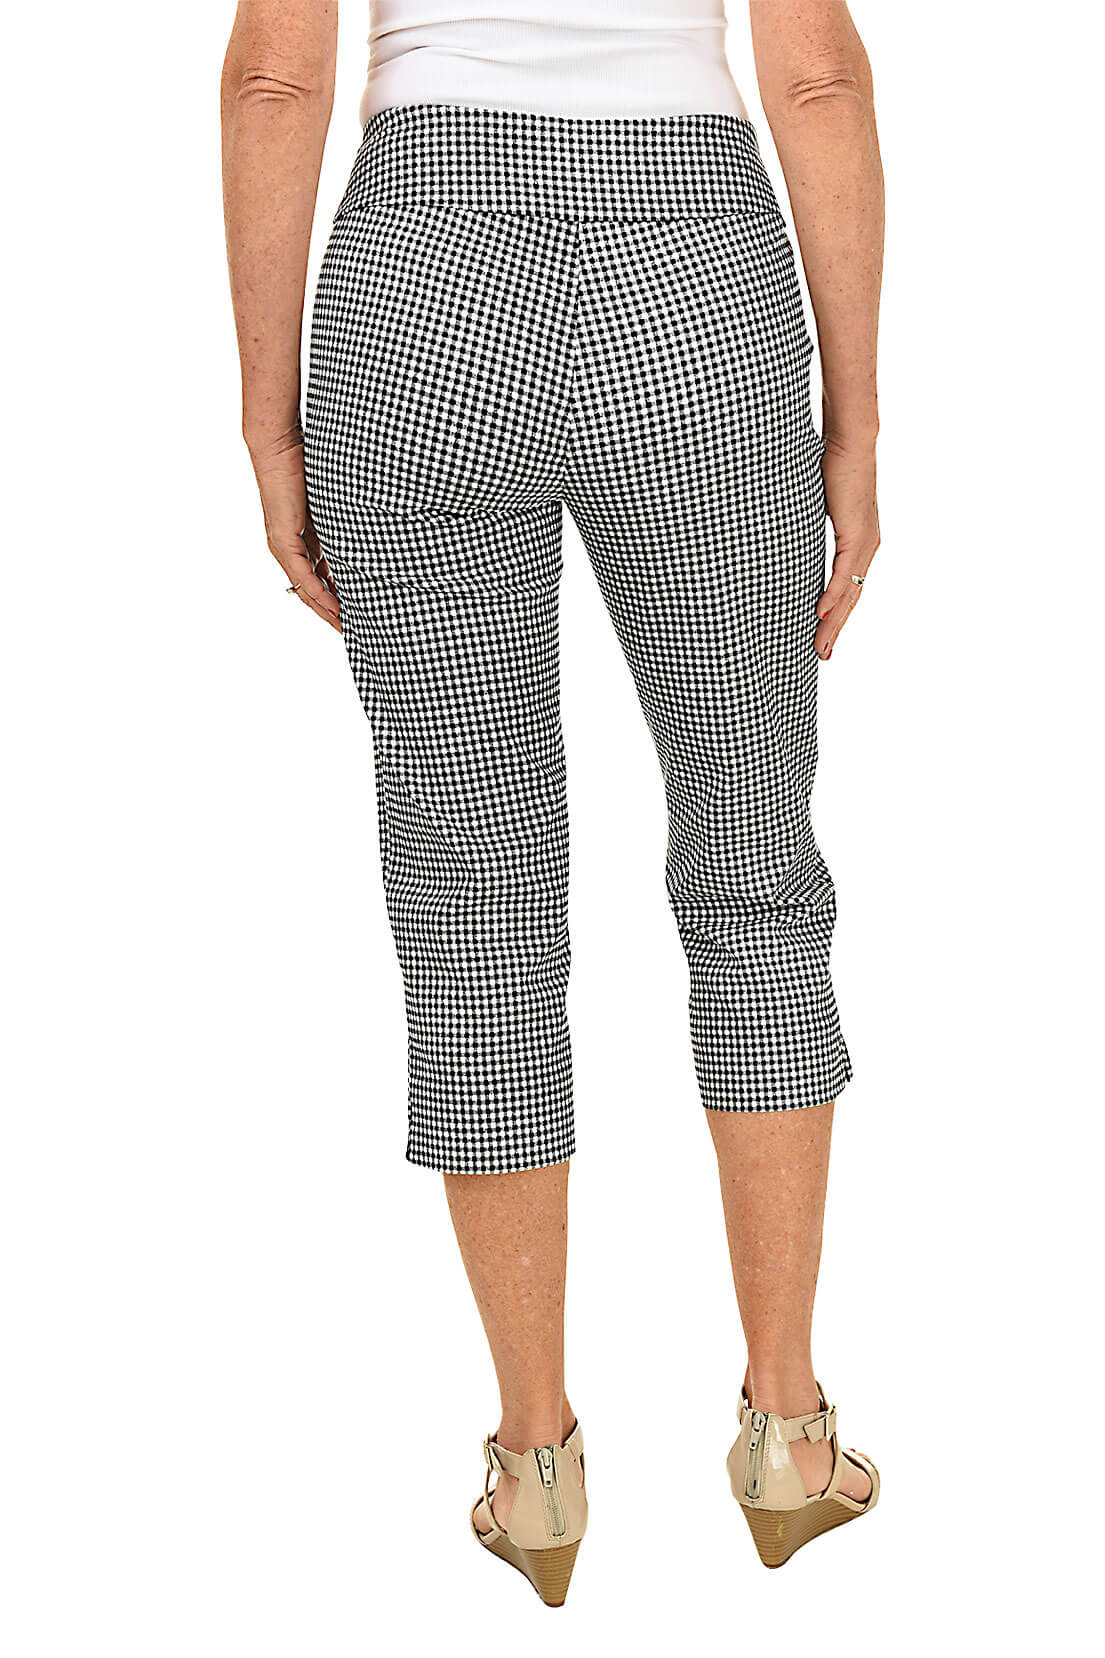 Petite Checkered Pull-On Crop Pant